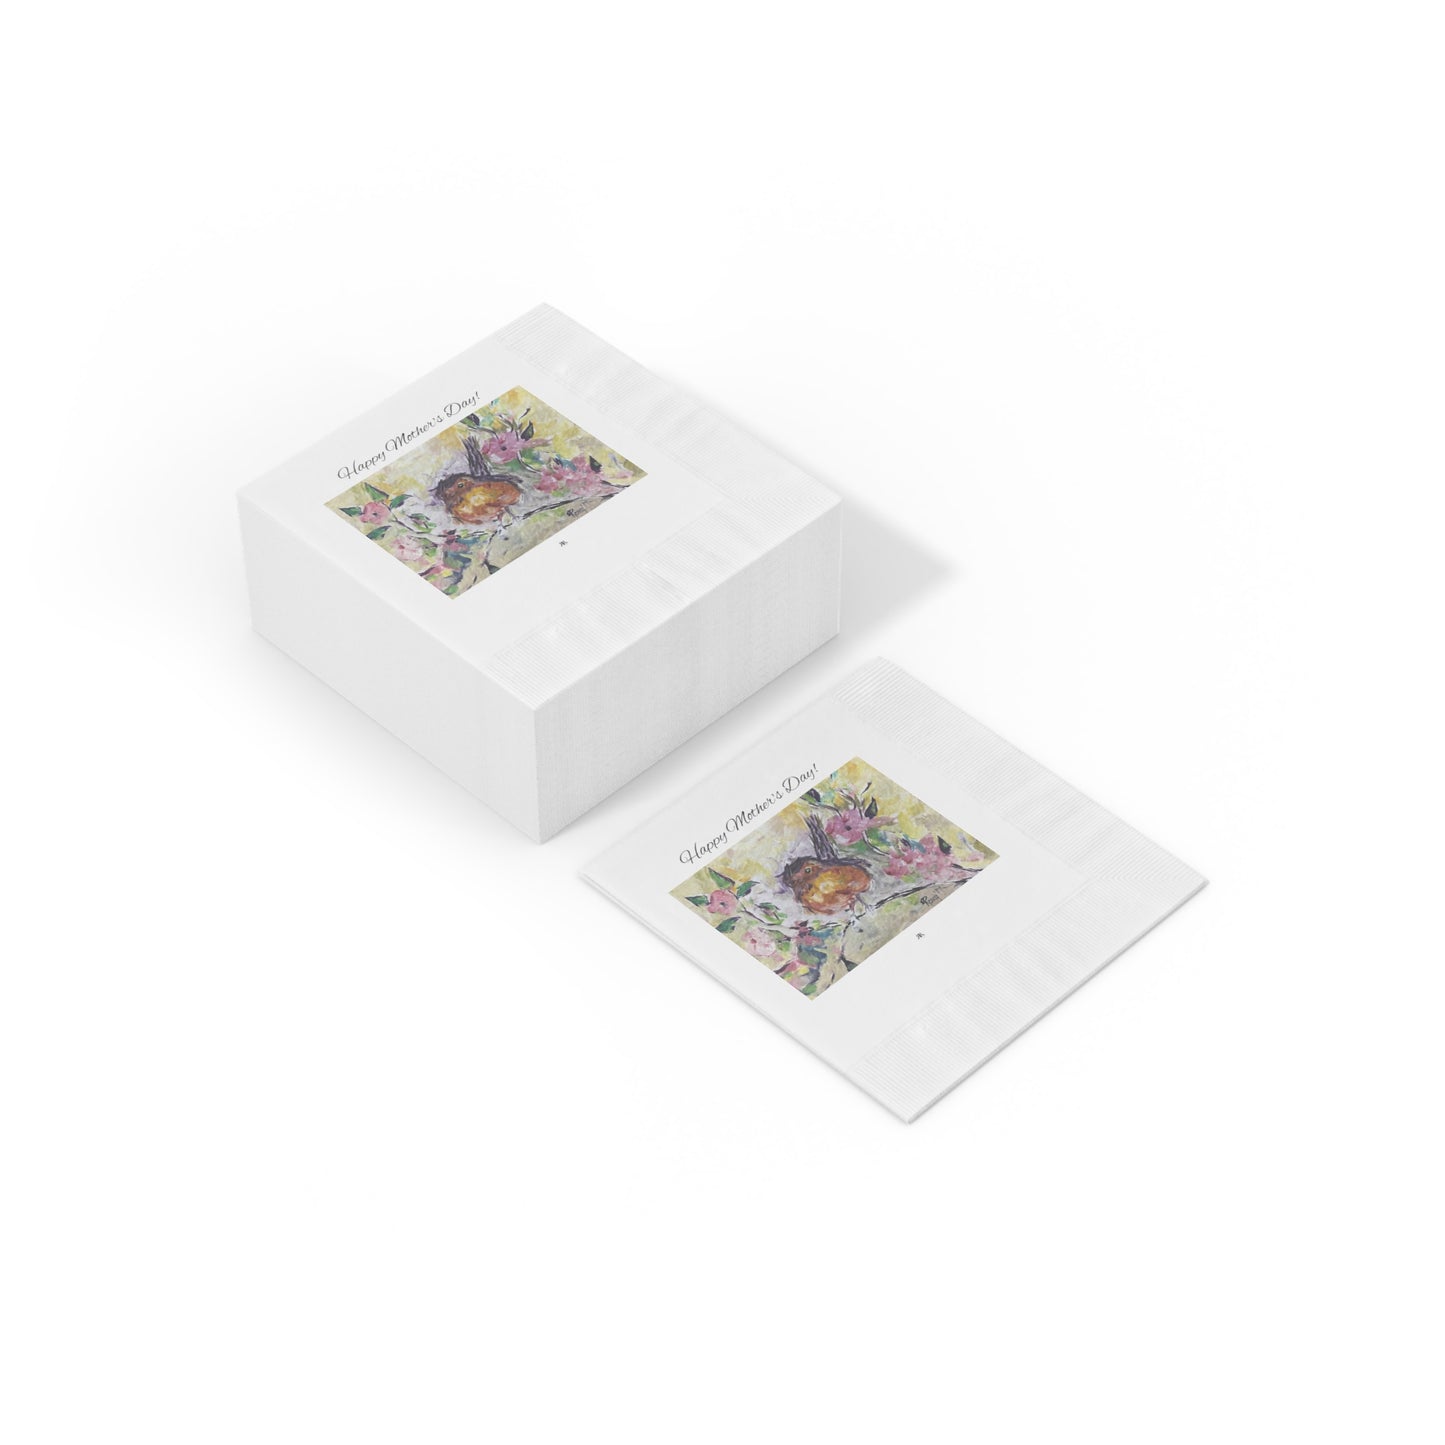 Happy Mother's Day! - Robin in Cherry Blossoms-White Coined Napkins